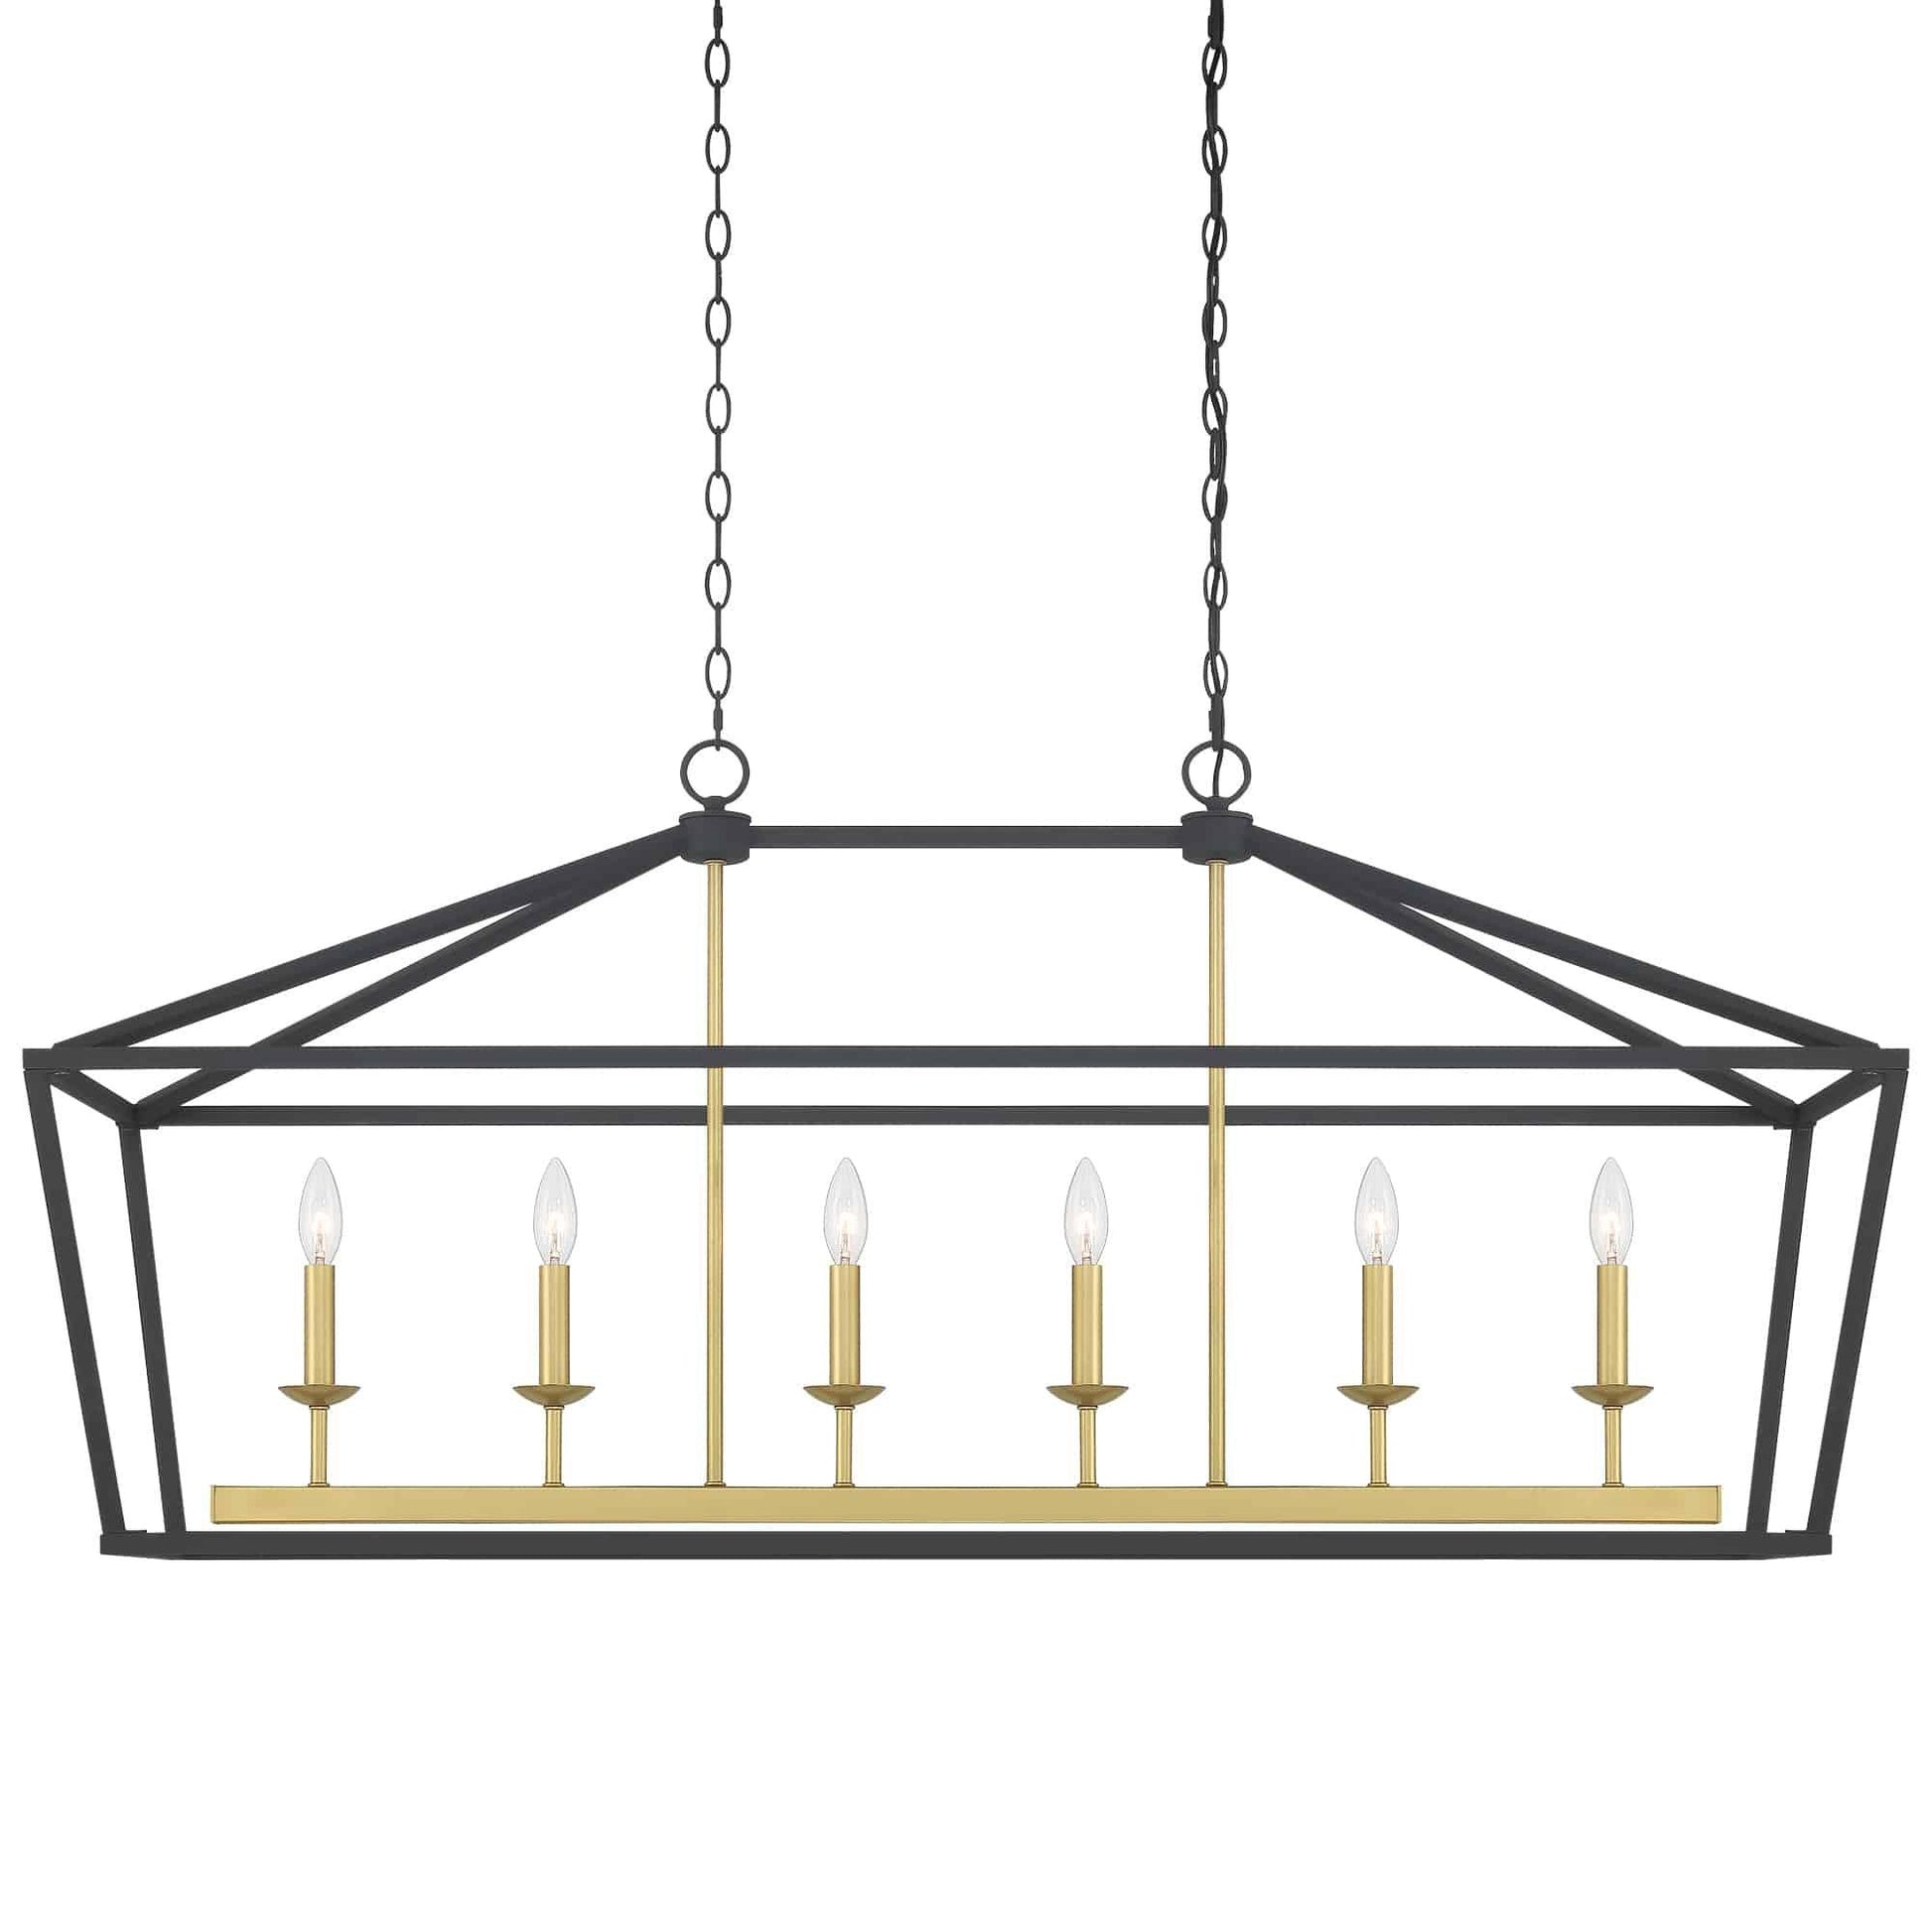 6 light linear kitchen island chandelier (2) by ACROMA